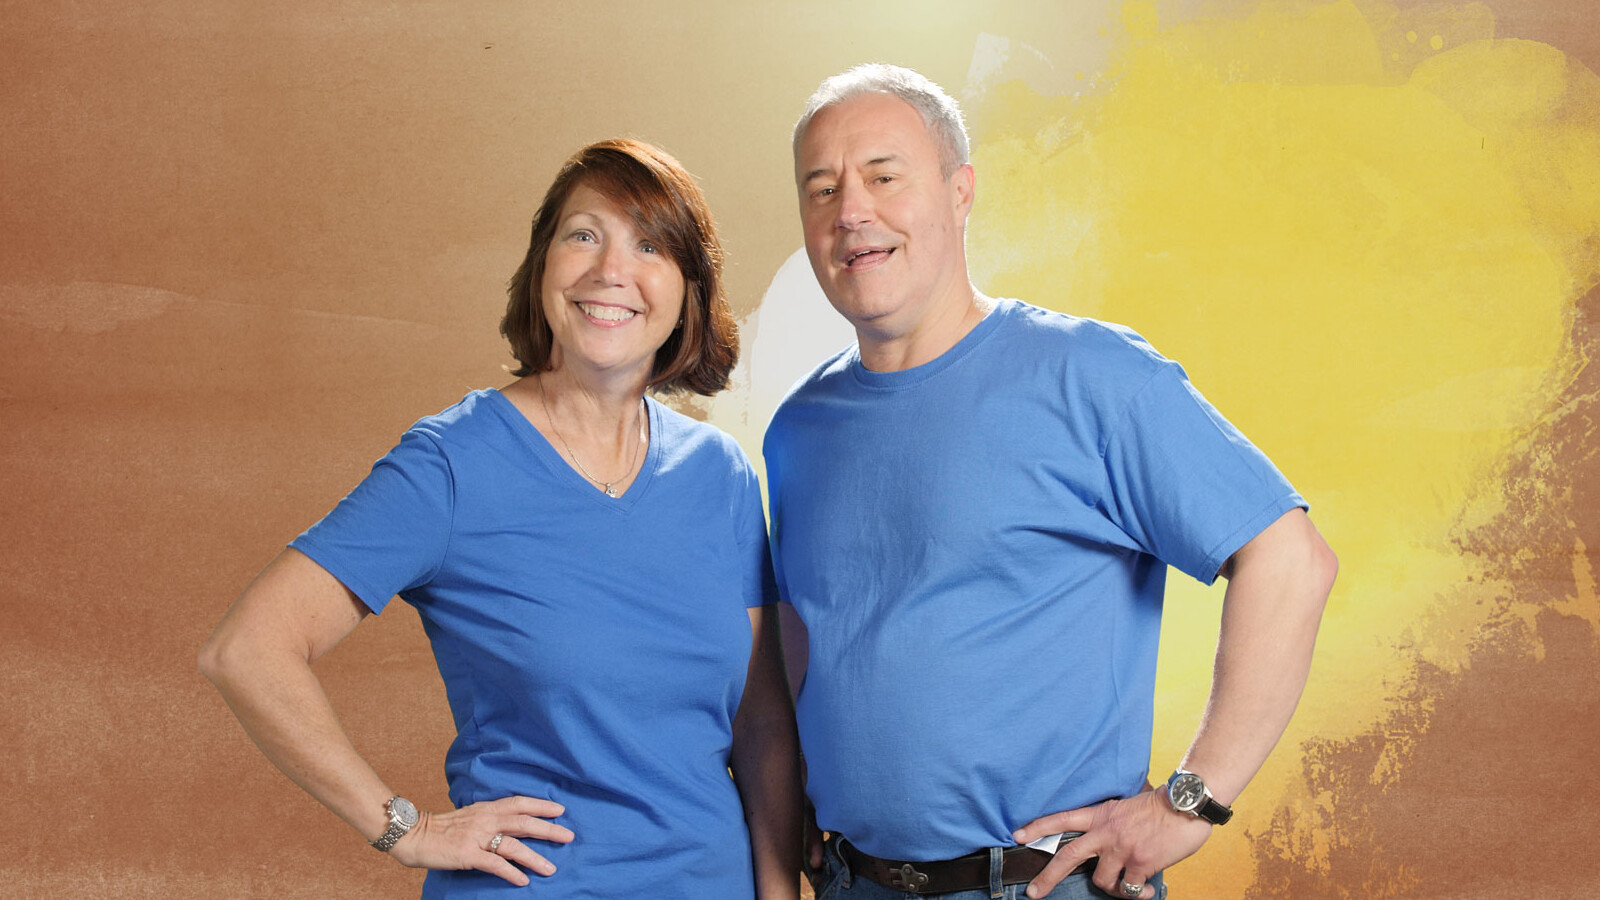 A woman and man wearing blue shirts posing in front of an abstract background